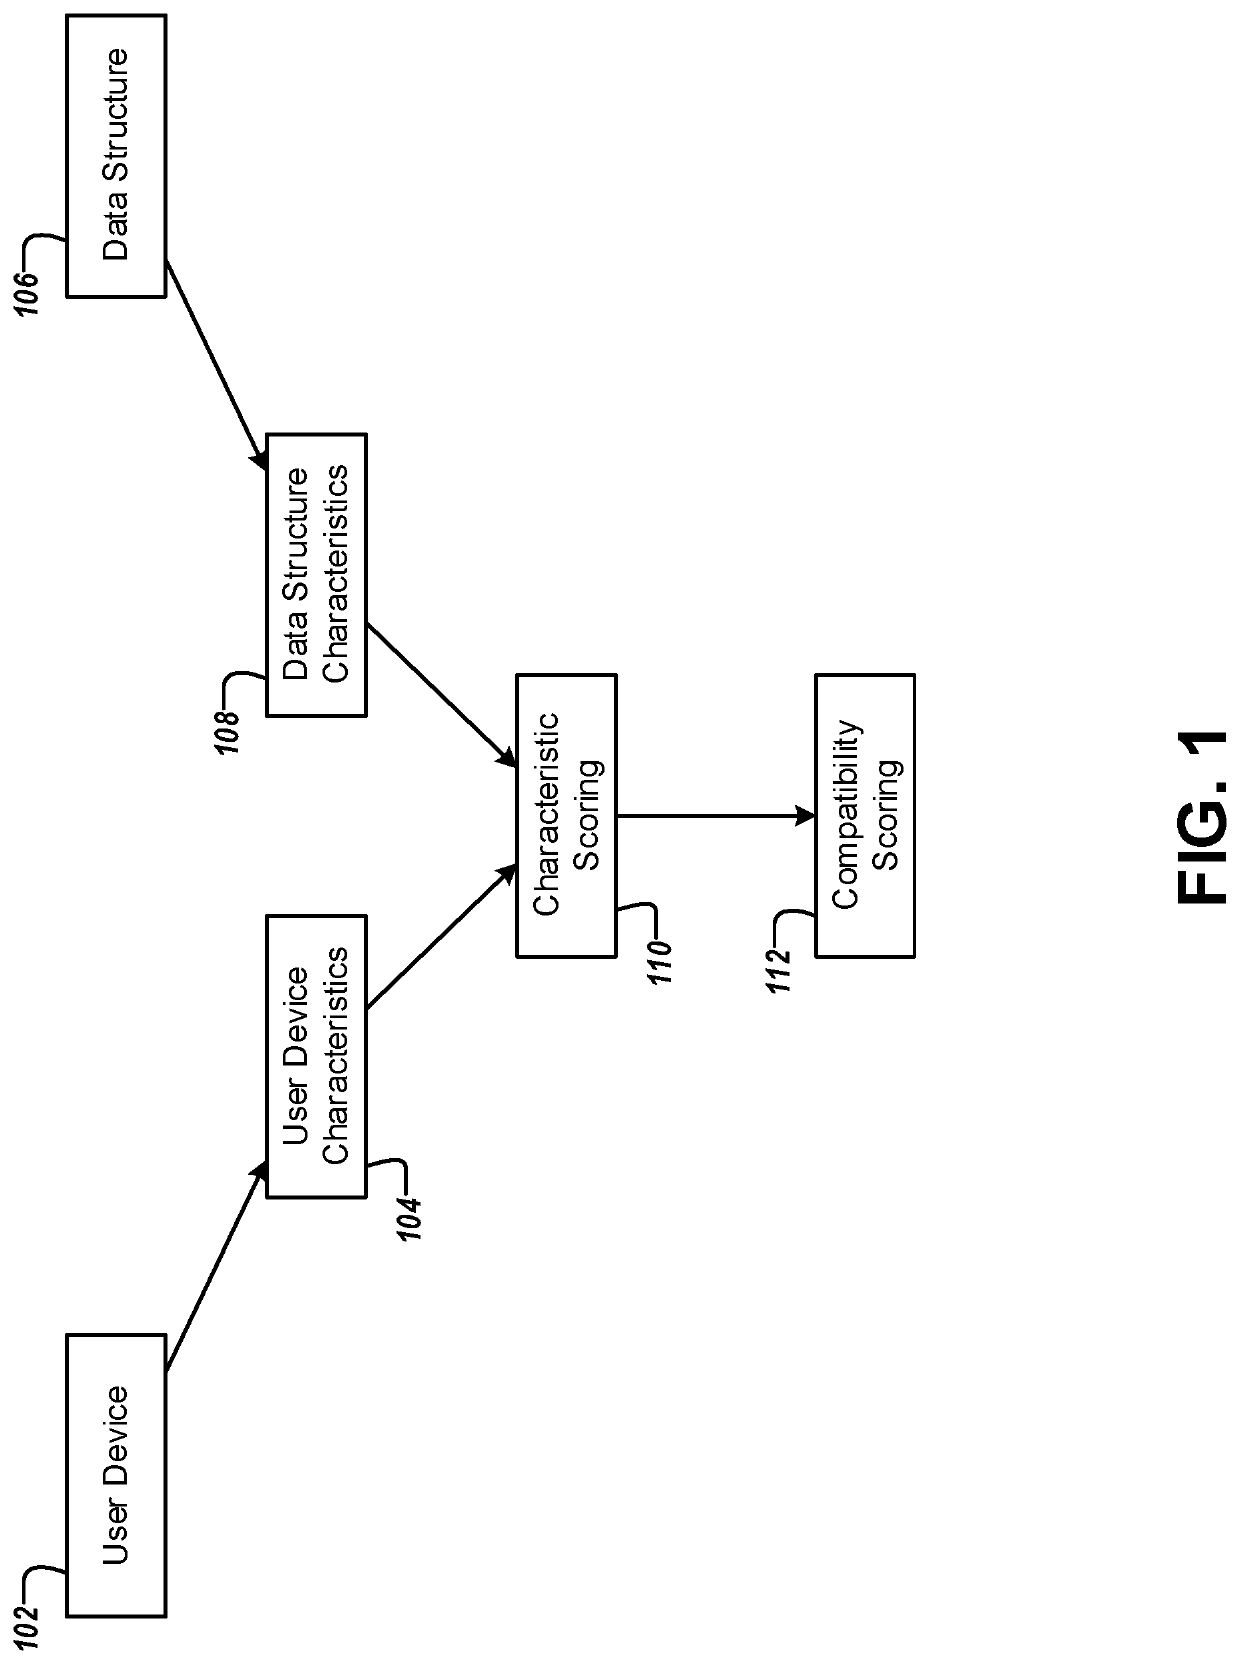 System and apparatus for automated evaluation of compatibility of data structures and user devices based on explicit user feedback